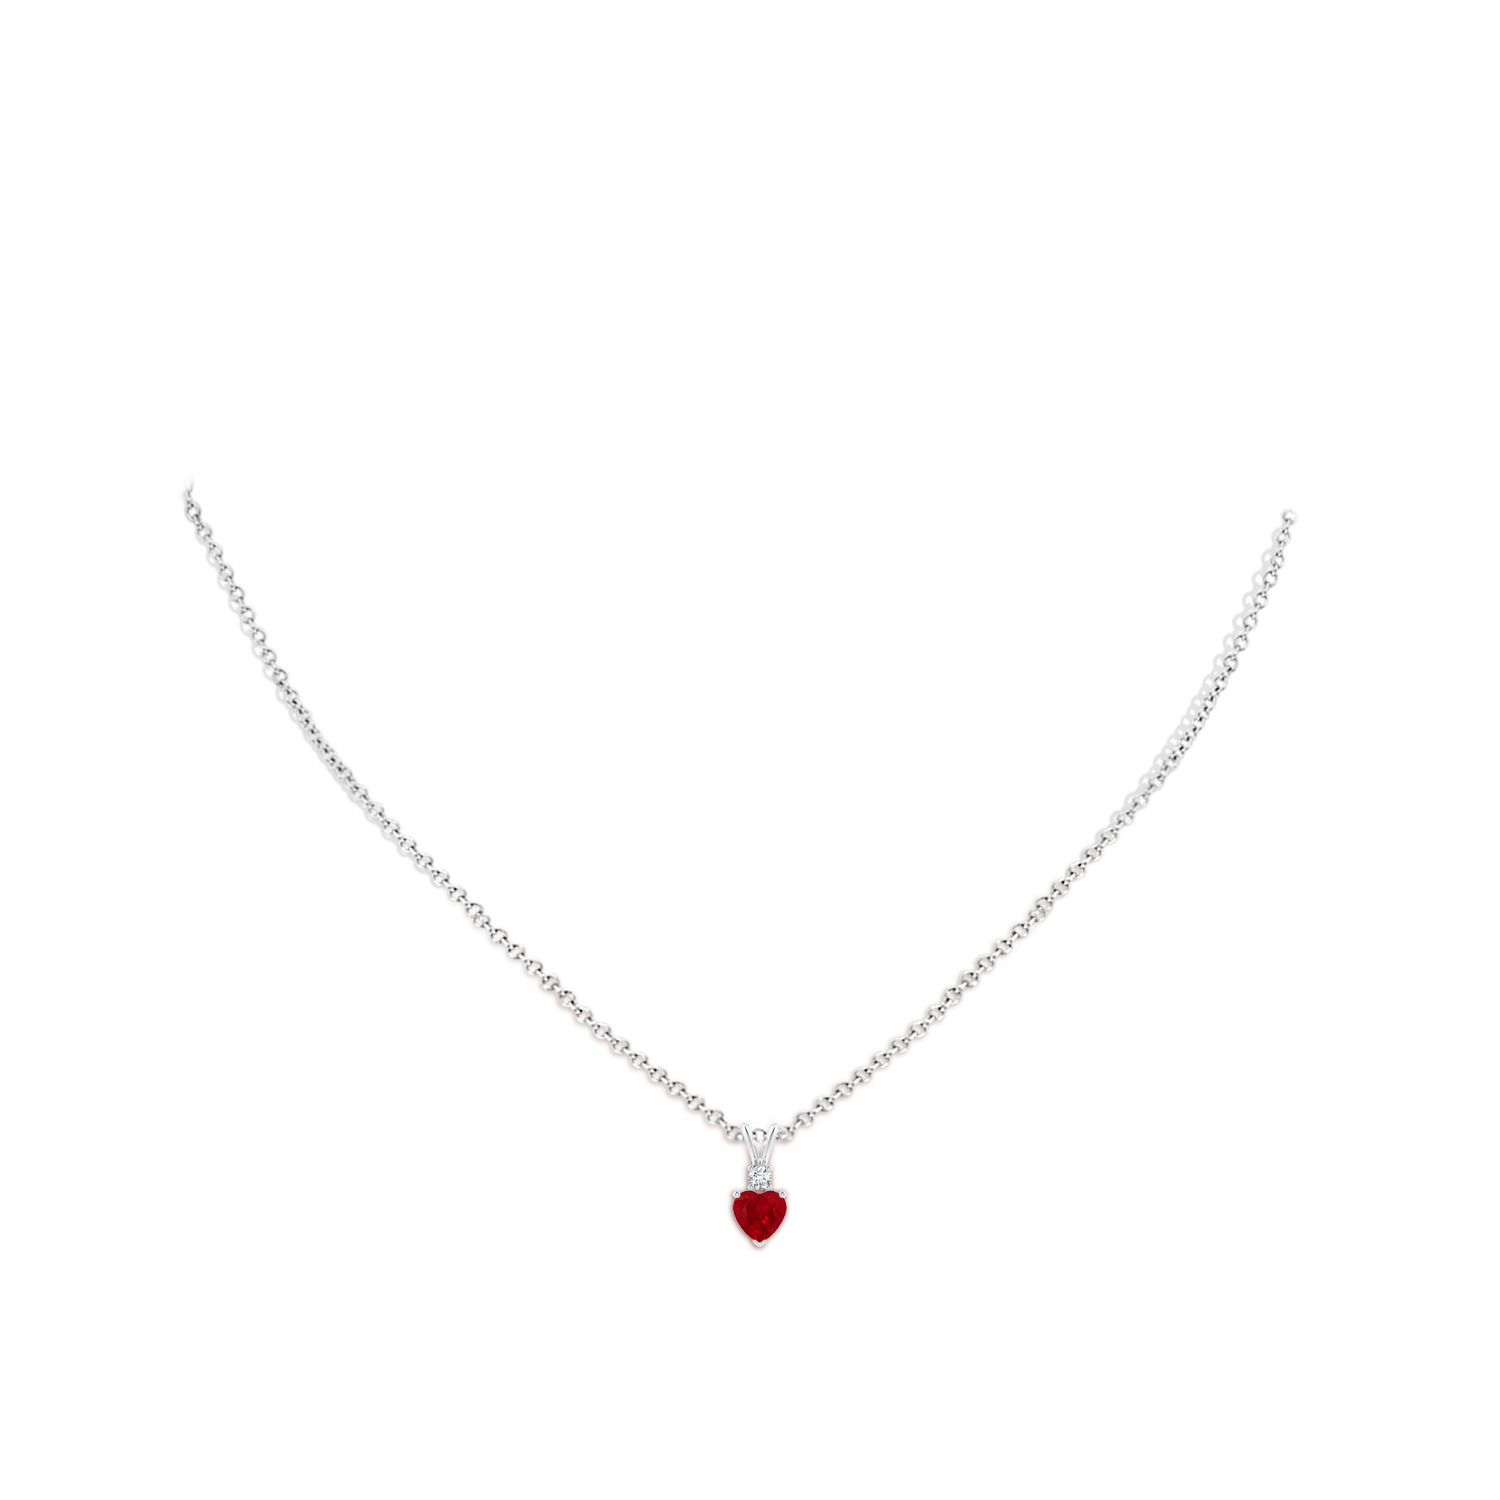 AAA - Ruby / 0.59 CT / 14 KT White Gold